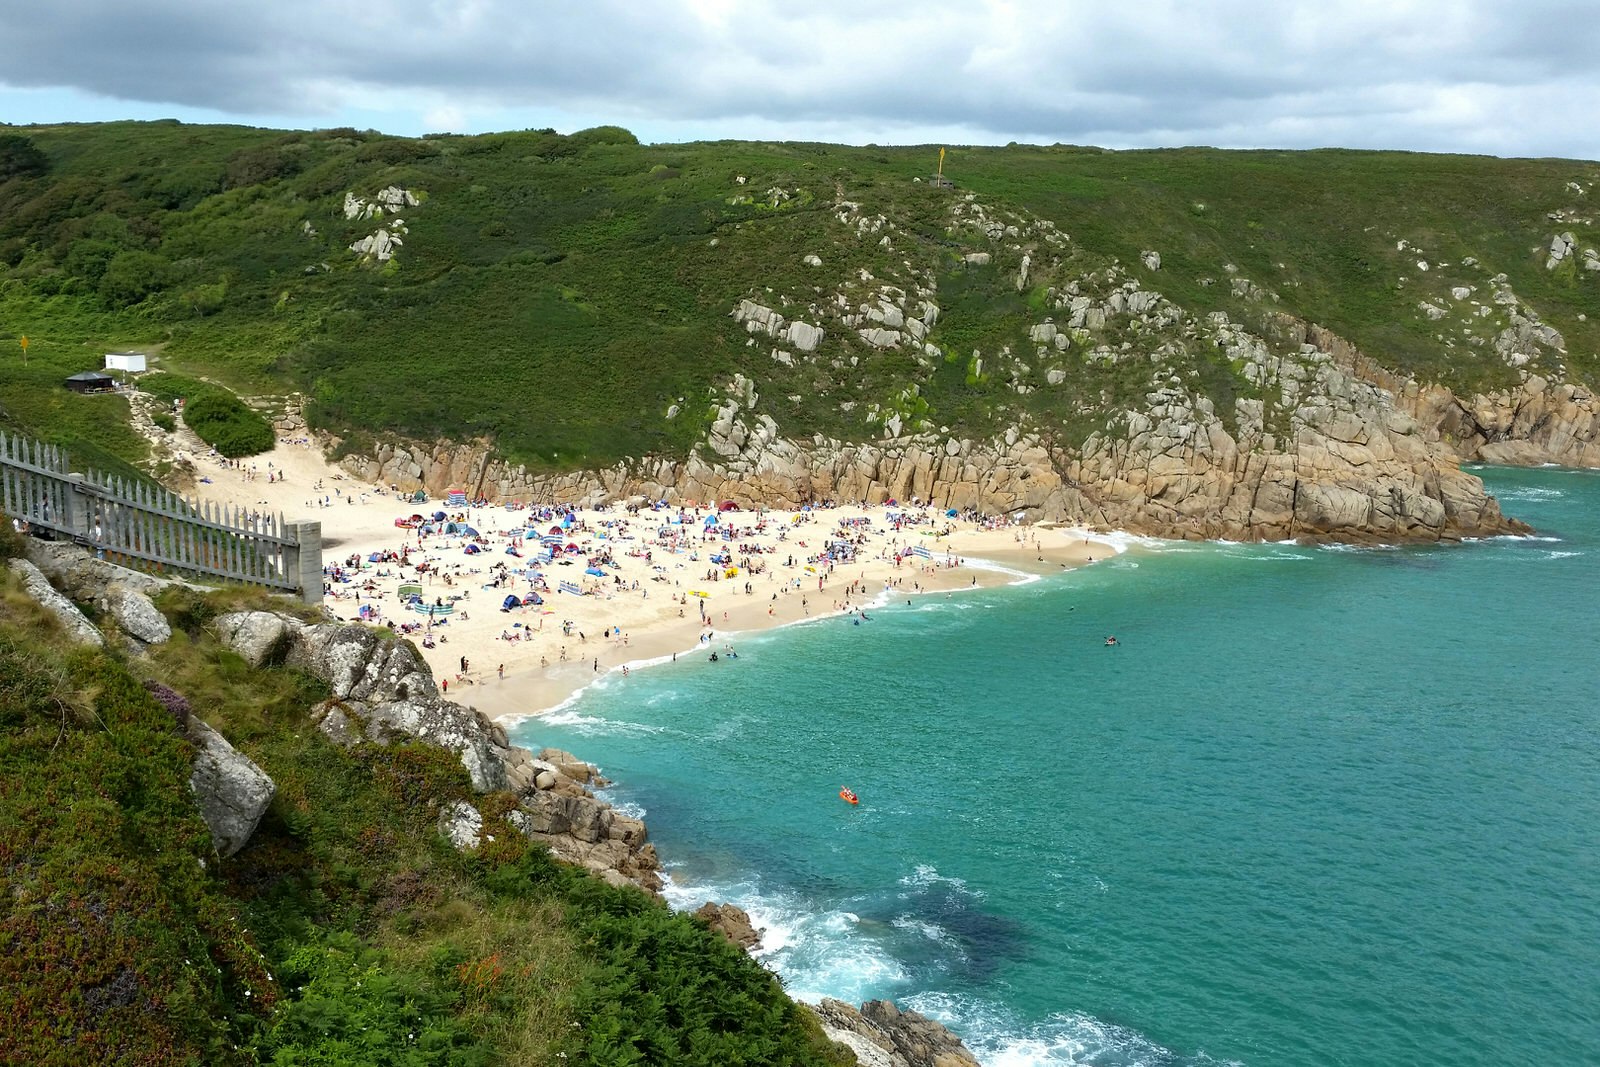 Porthcurno, just one of the stunning beaches within striking distance of Treen Farm © David Else / Lonely Planet